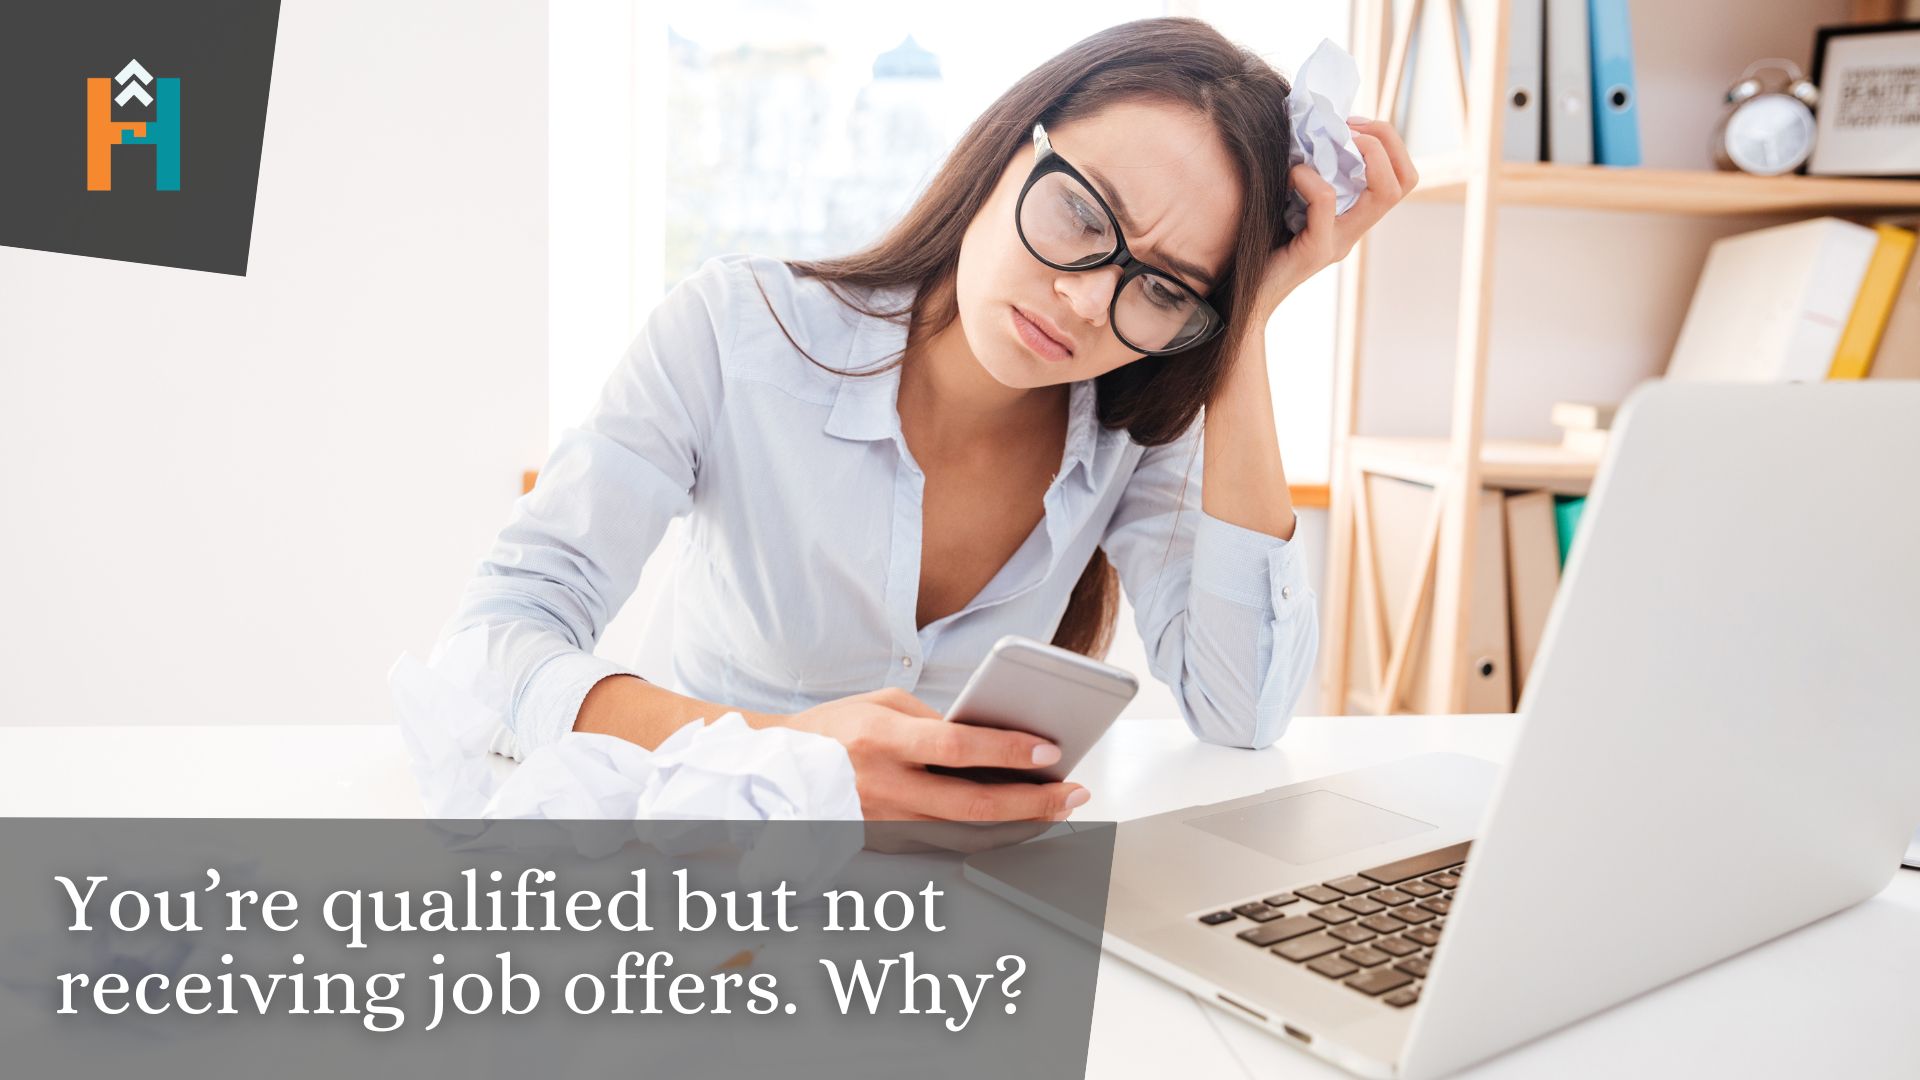 You're qualified but not receiving job offers. Why?